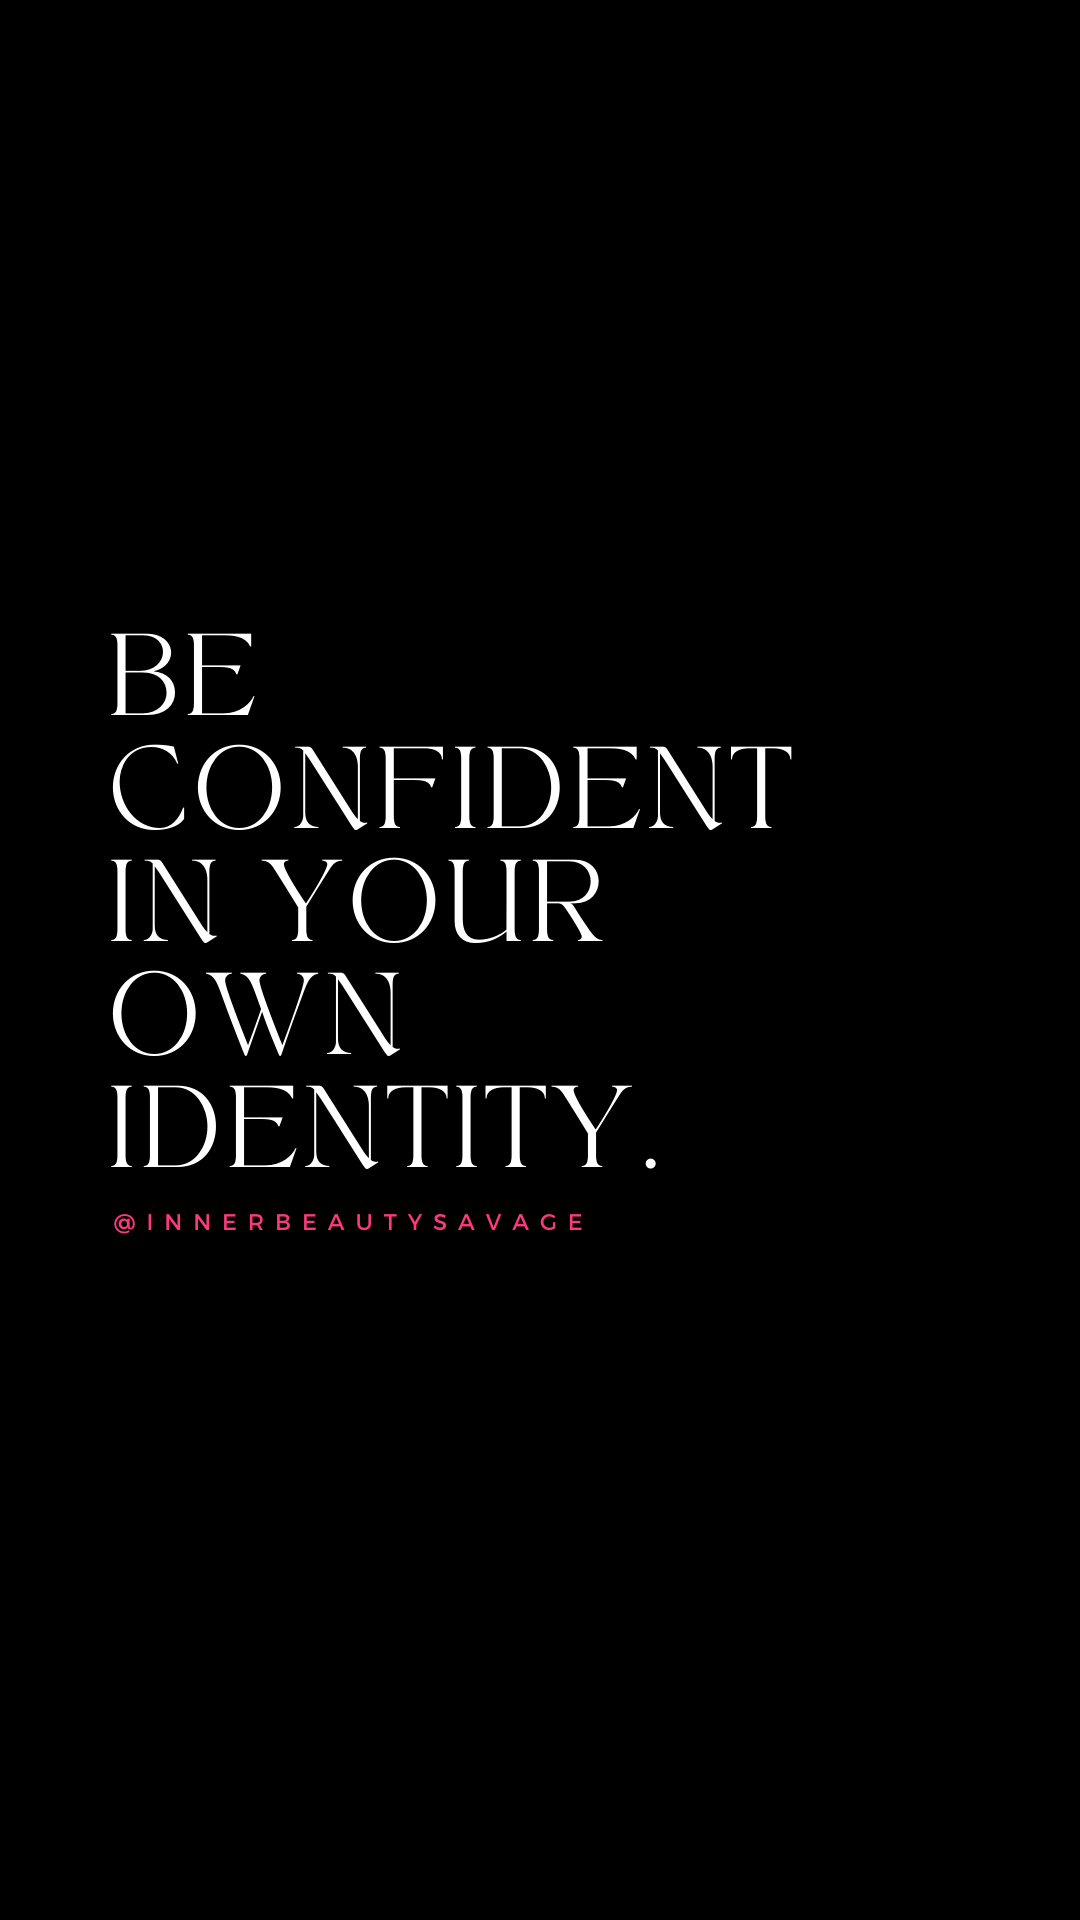 Quote on Being Confident in Your Identity